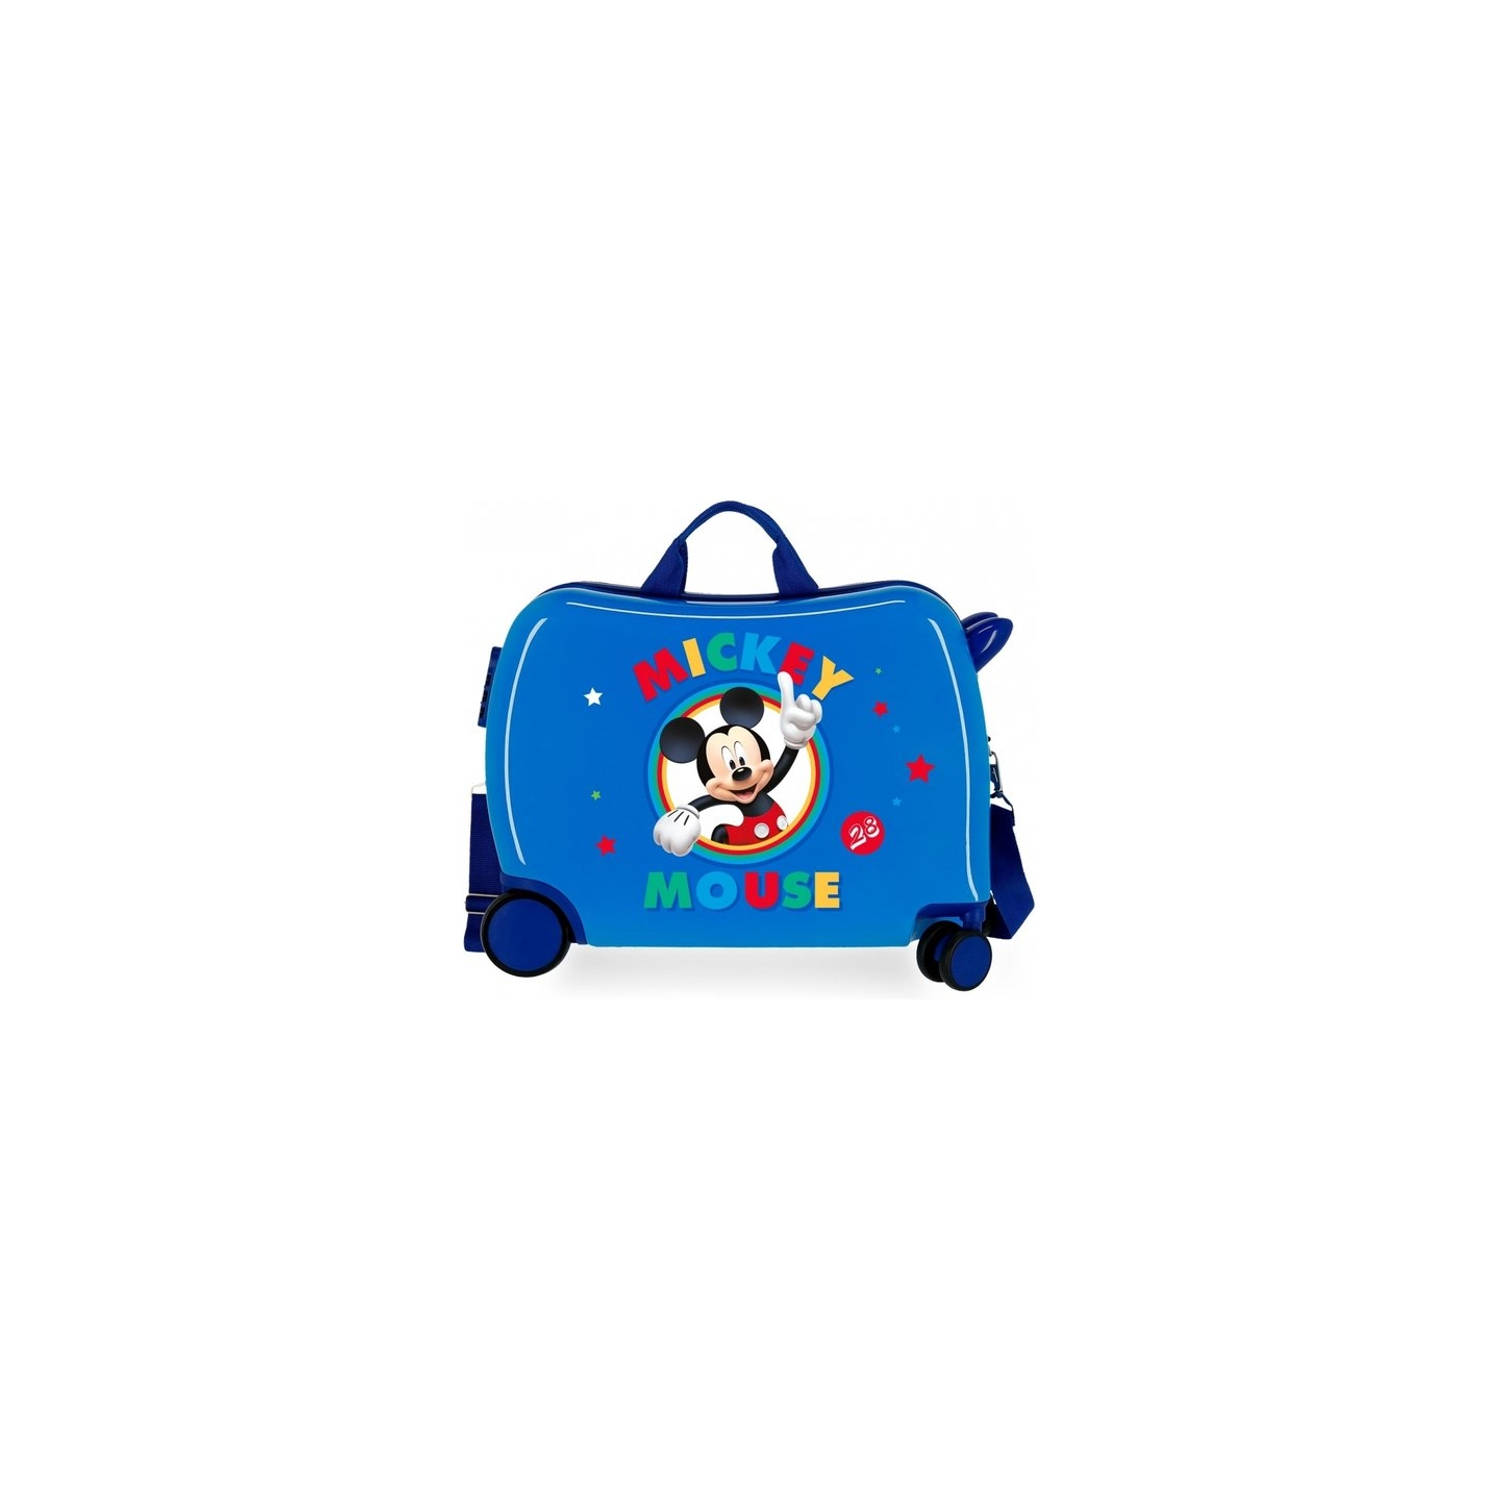 Disney kinderkoffer Mickey Mouse 50 cm ABS 34 liter blauw